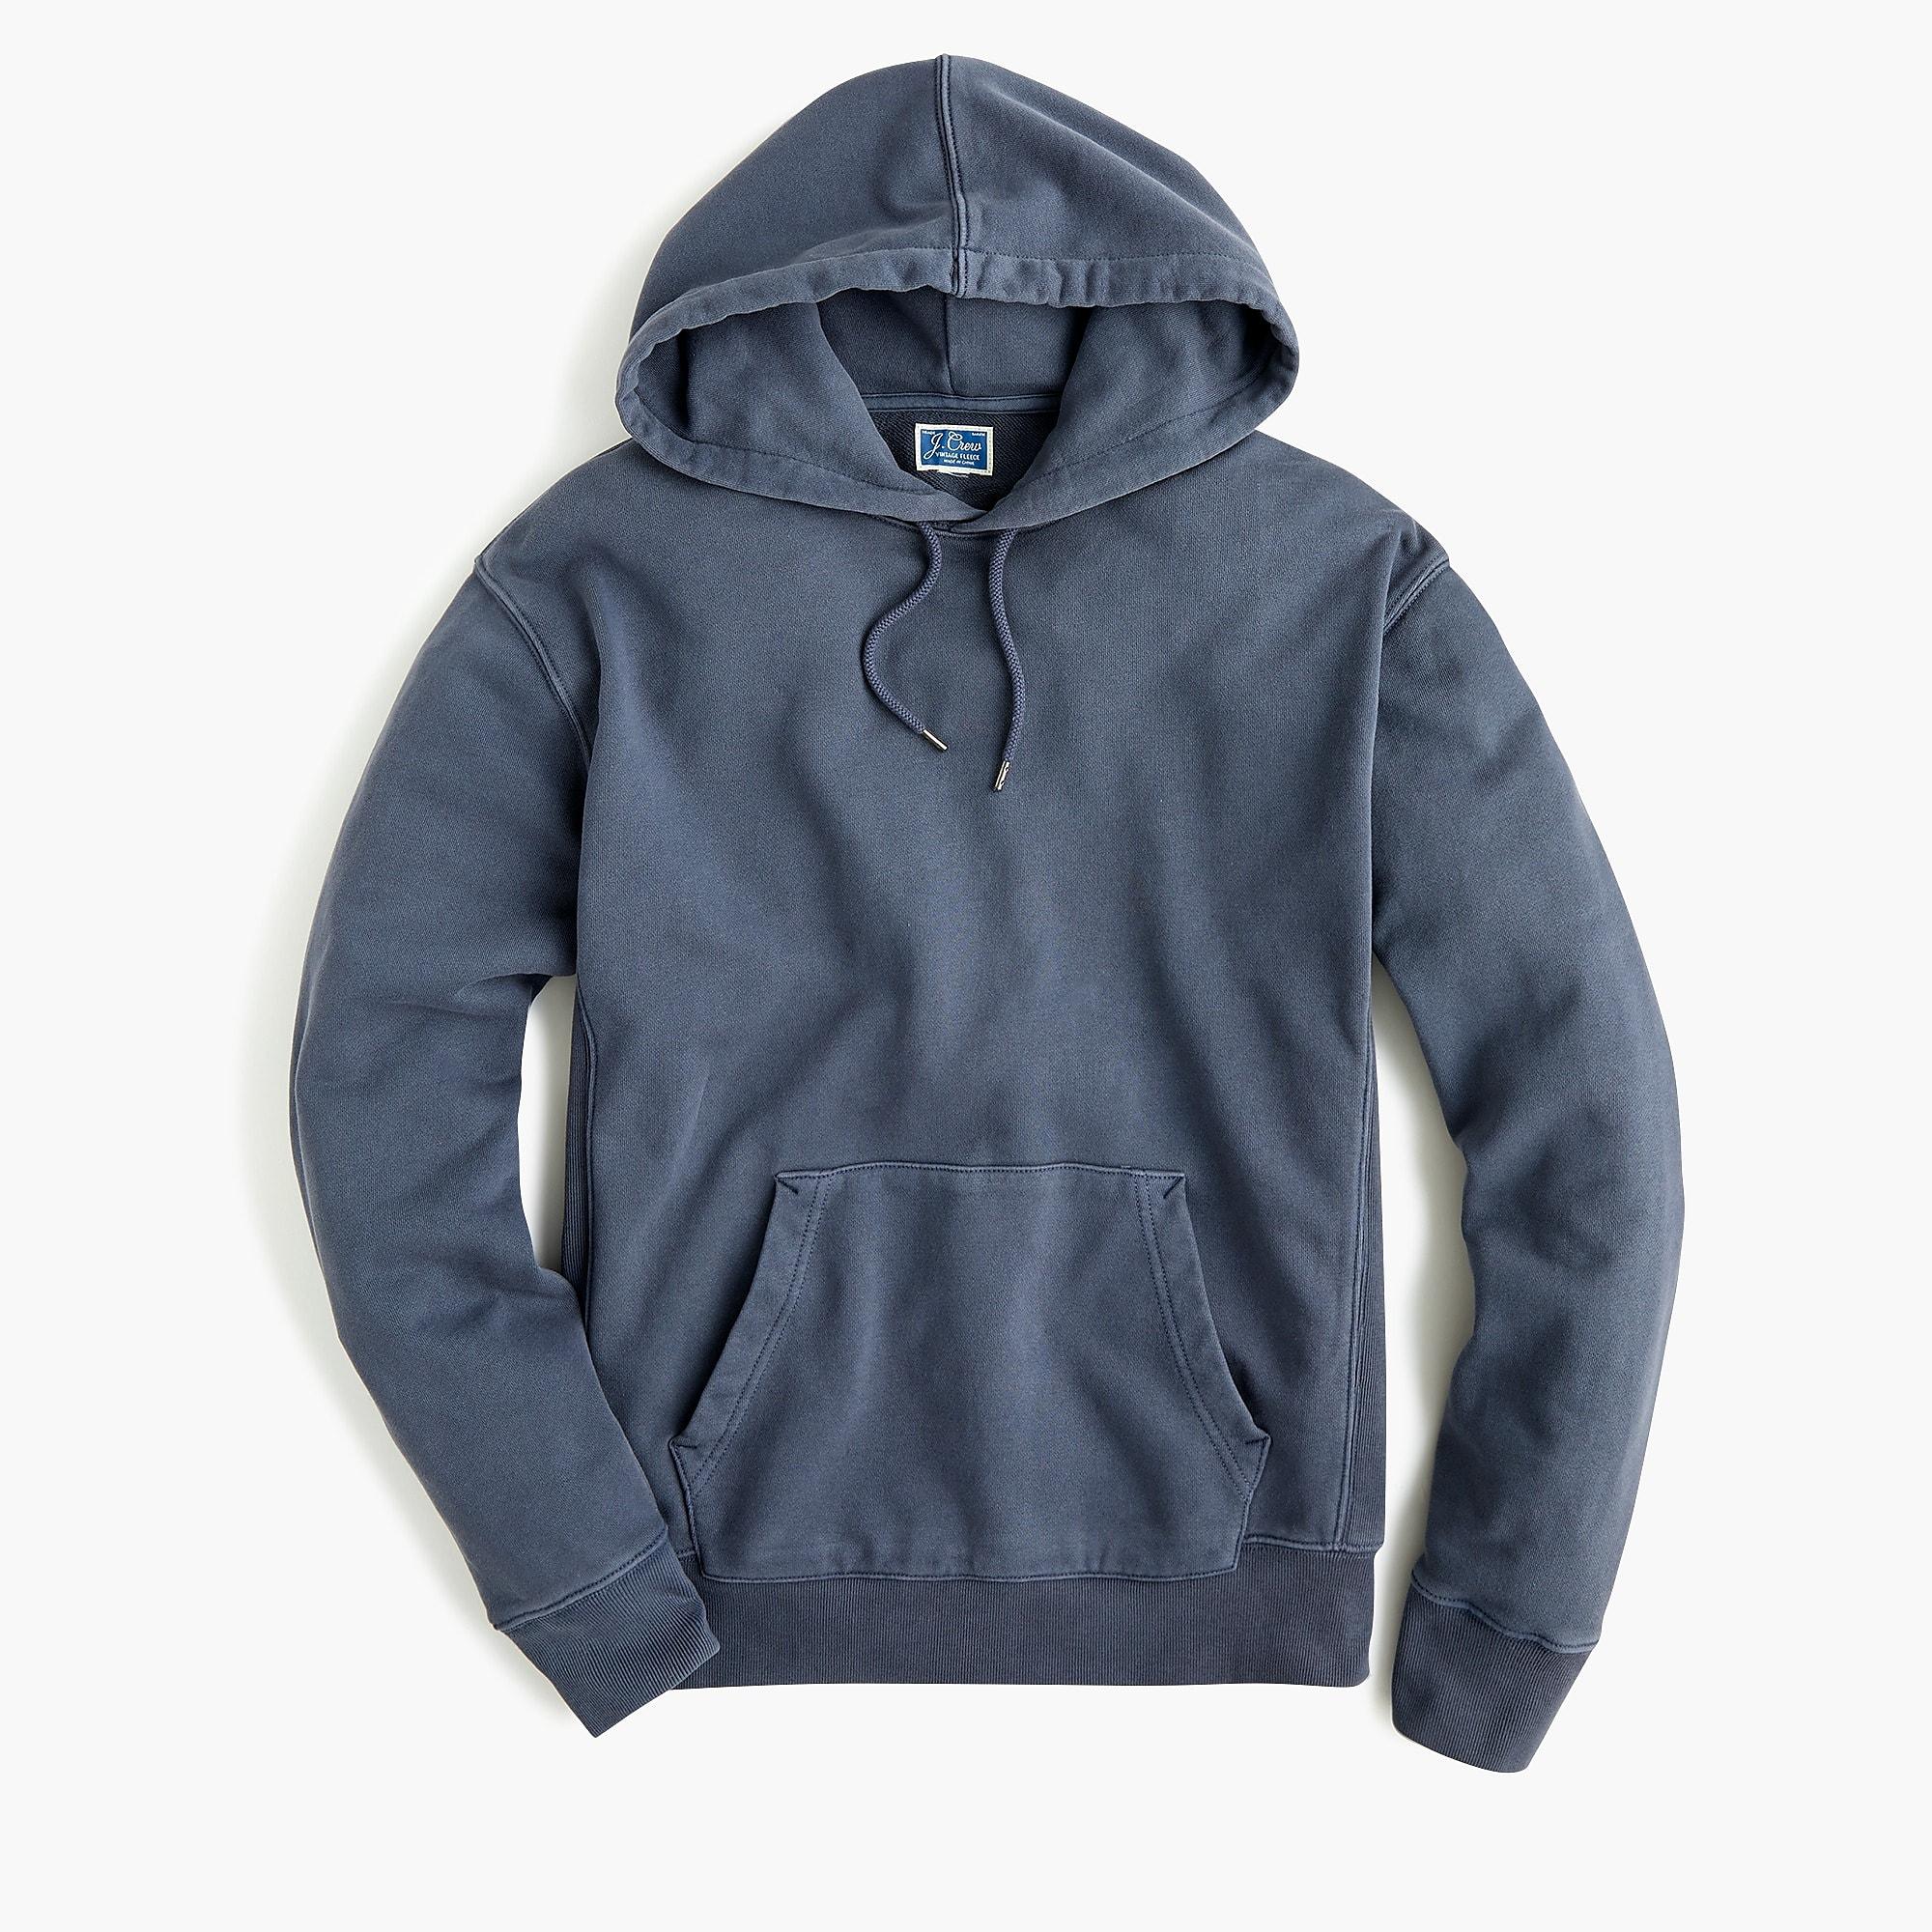 J.Crew Cotton Tall Garment-dyed French Terry Hoodie in Blue for Men - Lyst